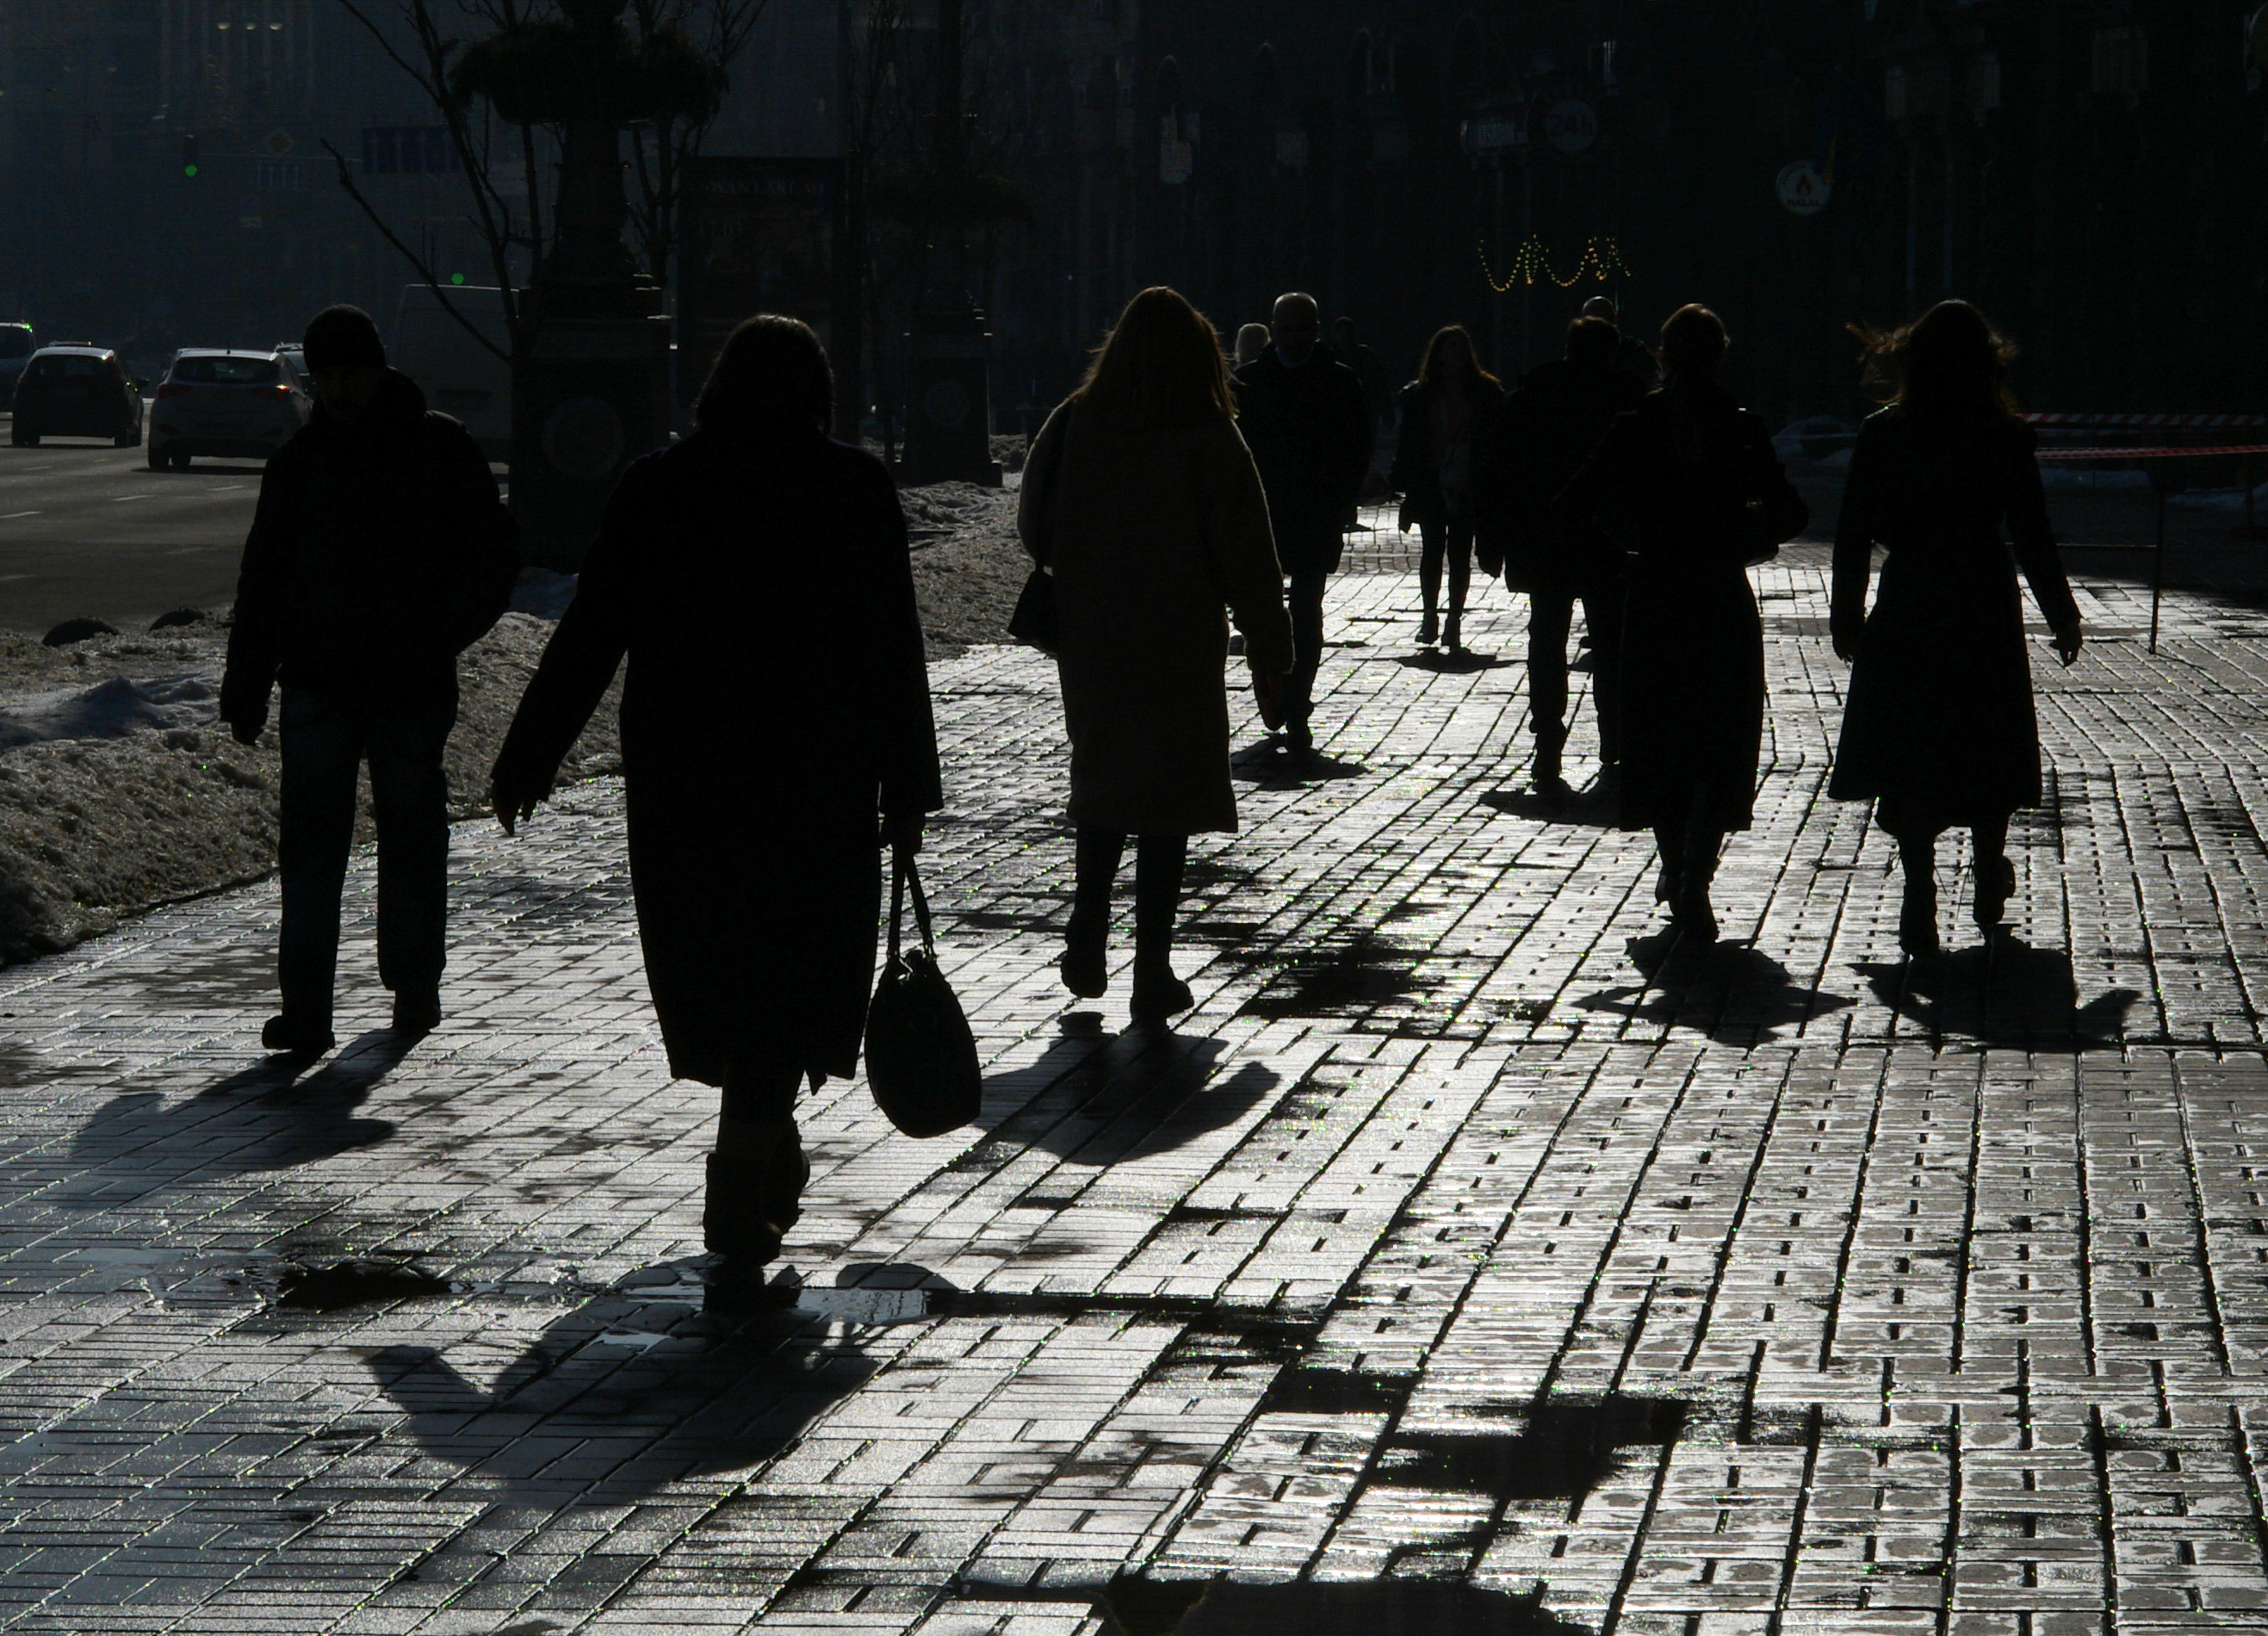 Pedestrians are silhouetted as they walk on a sunny day in central Kyiv